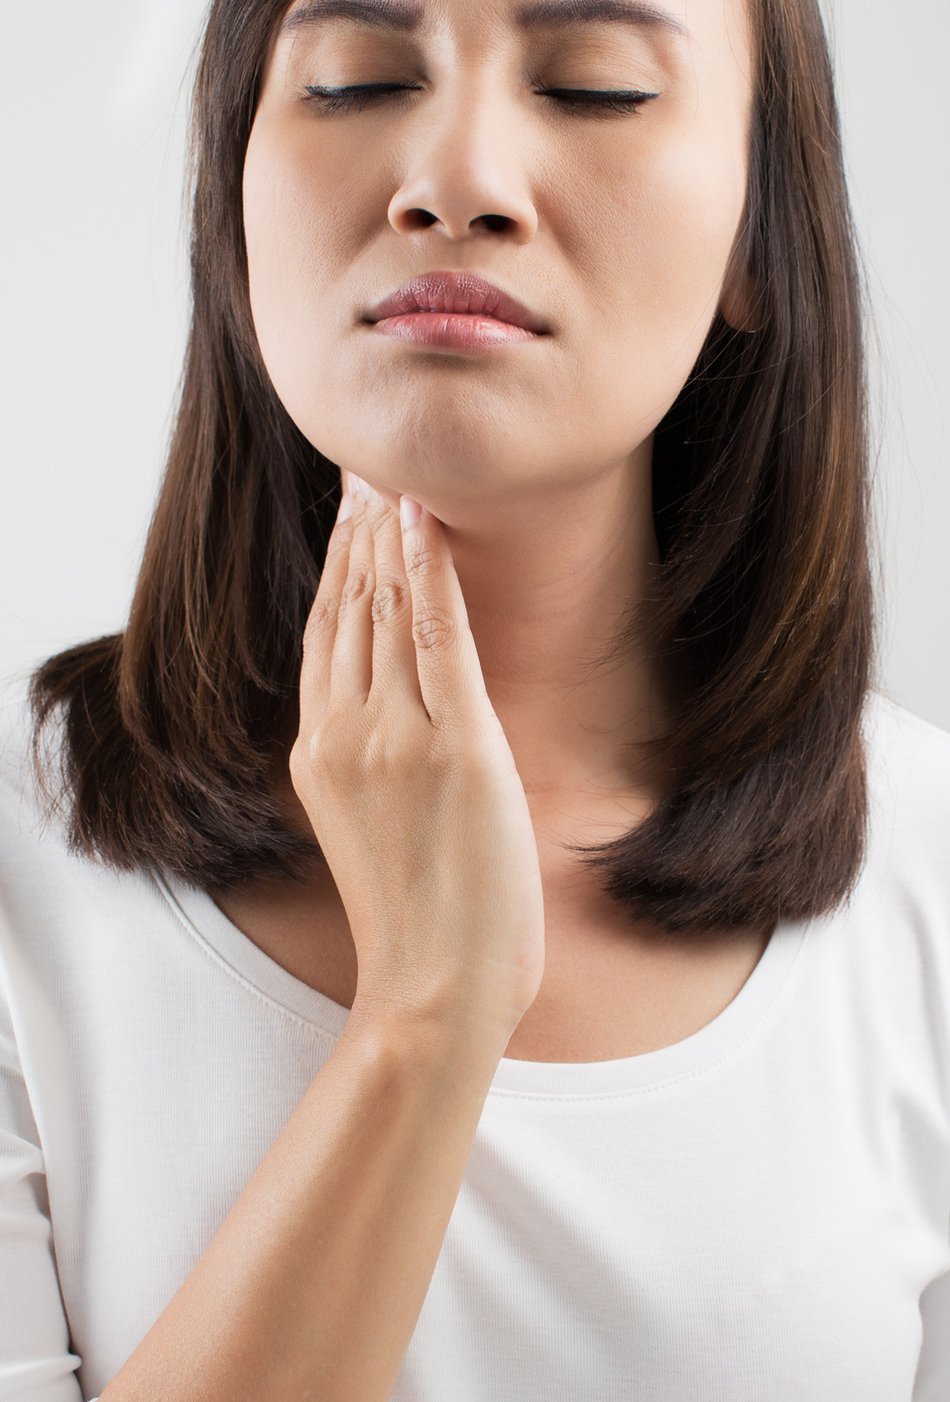 Is Your Thyroid Sabotaging Your Diet?